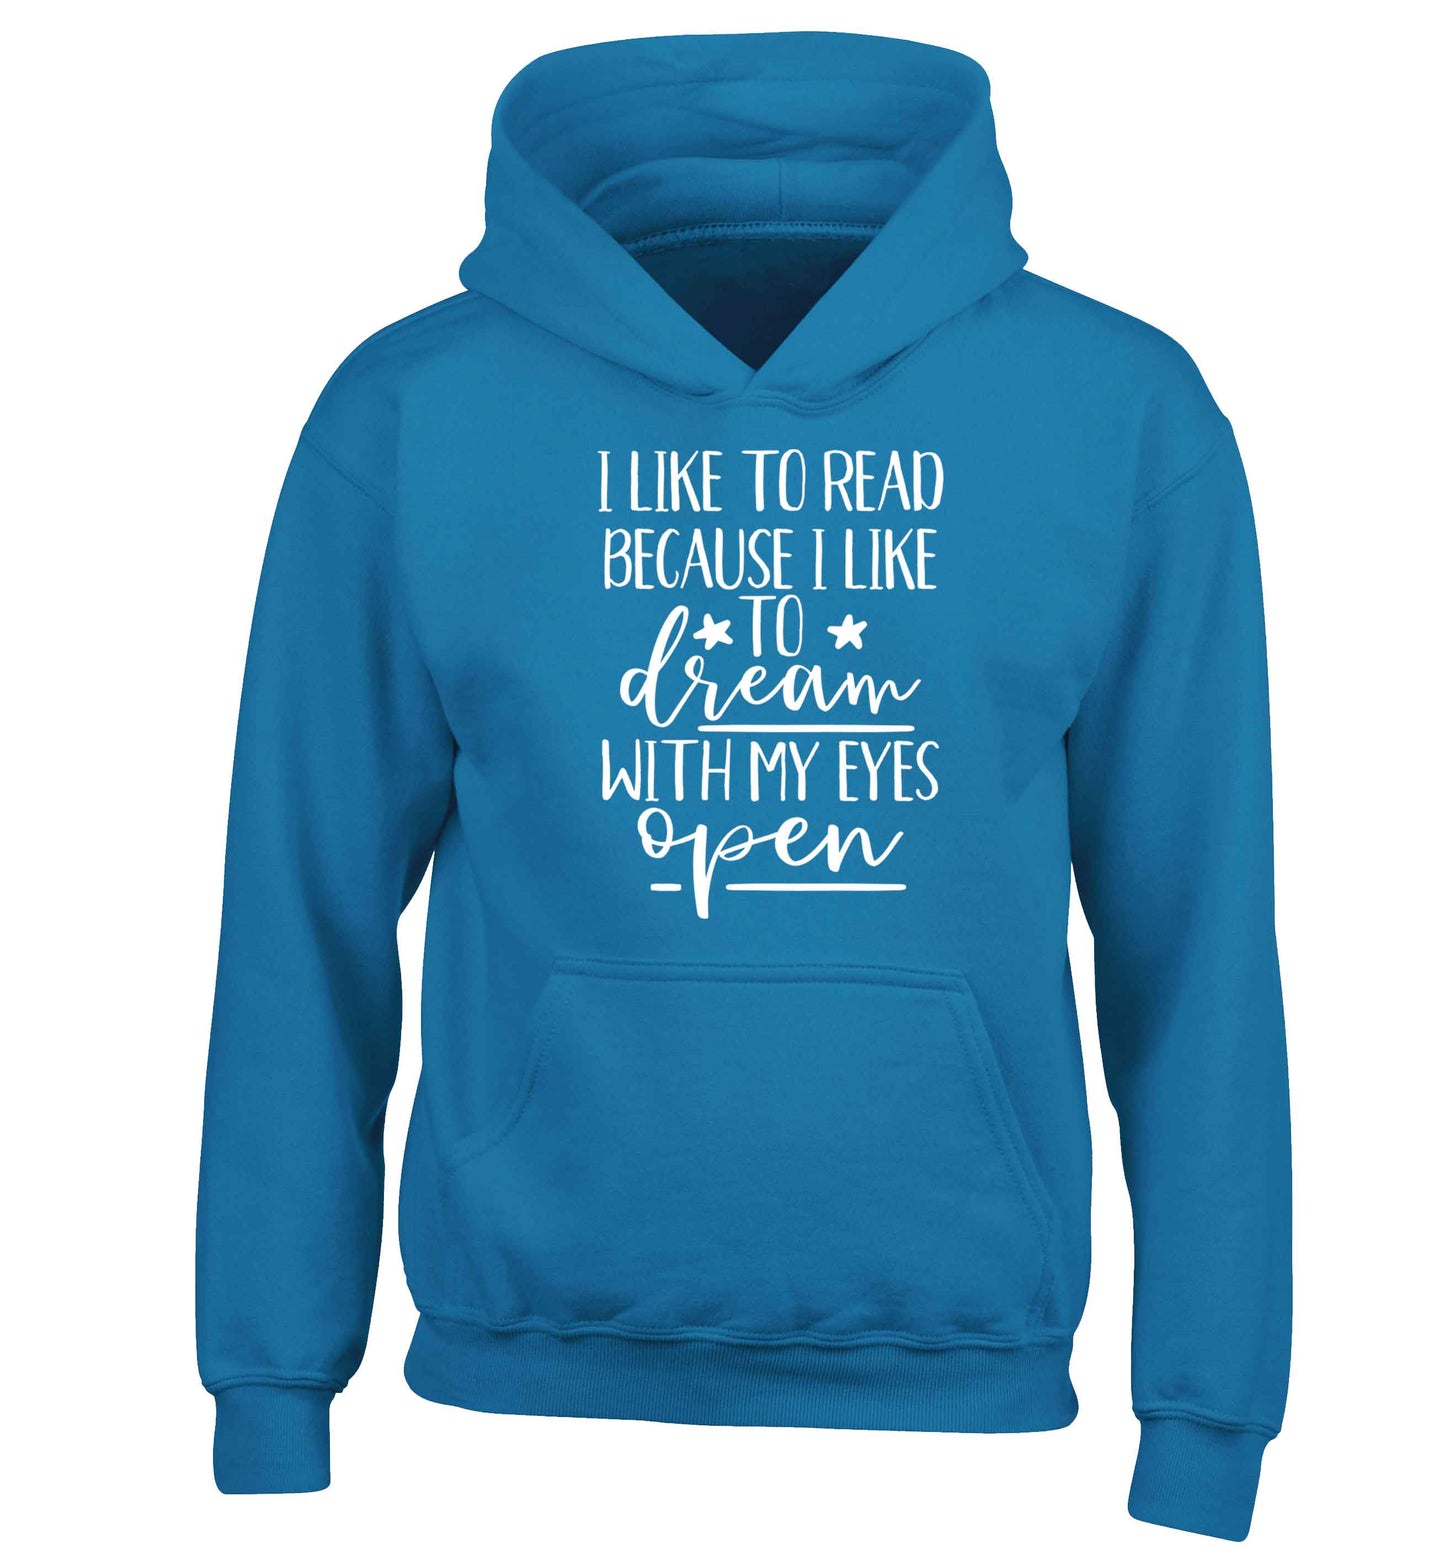 I like to read because I like to dream with my eyes open children's blue hoodie 12-13 Years